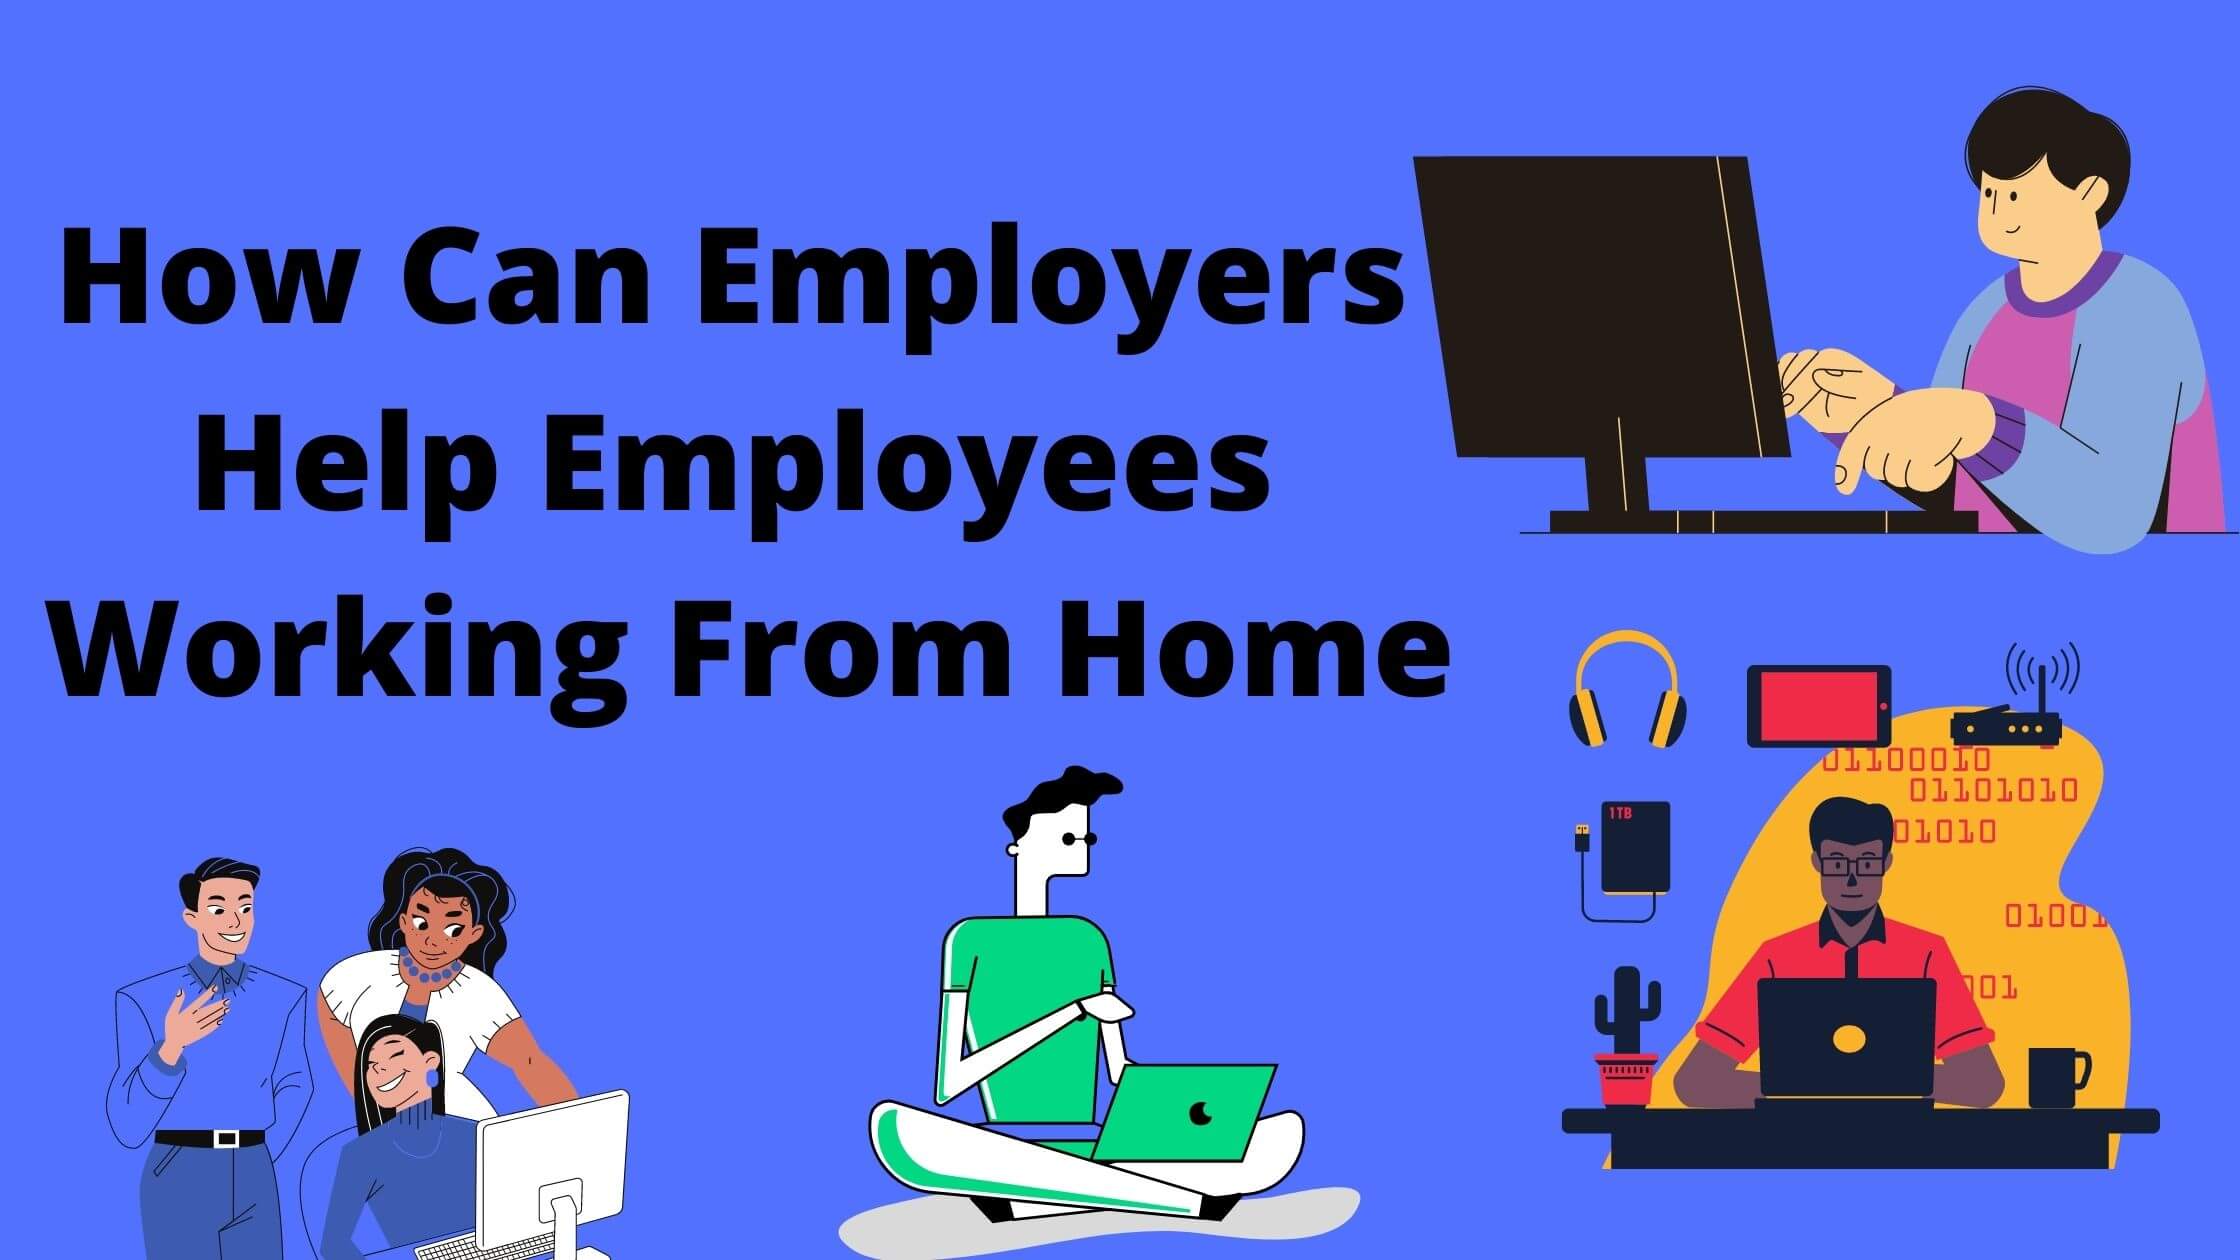 How can Employers Help Employees